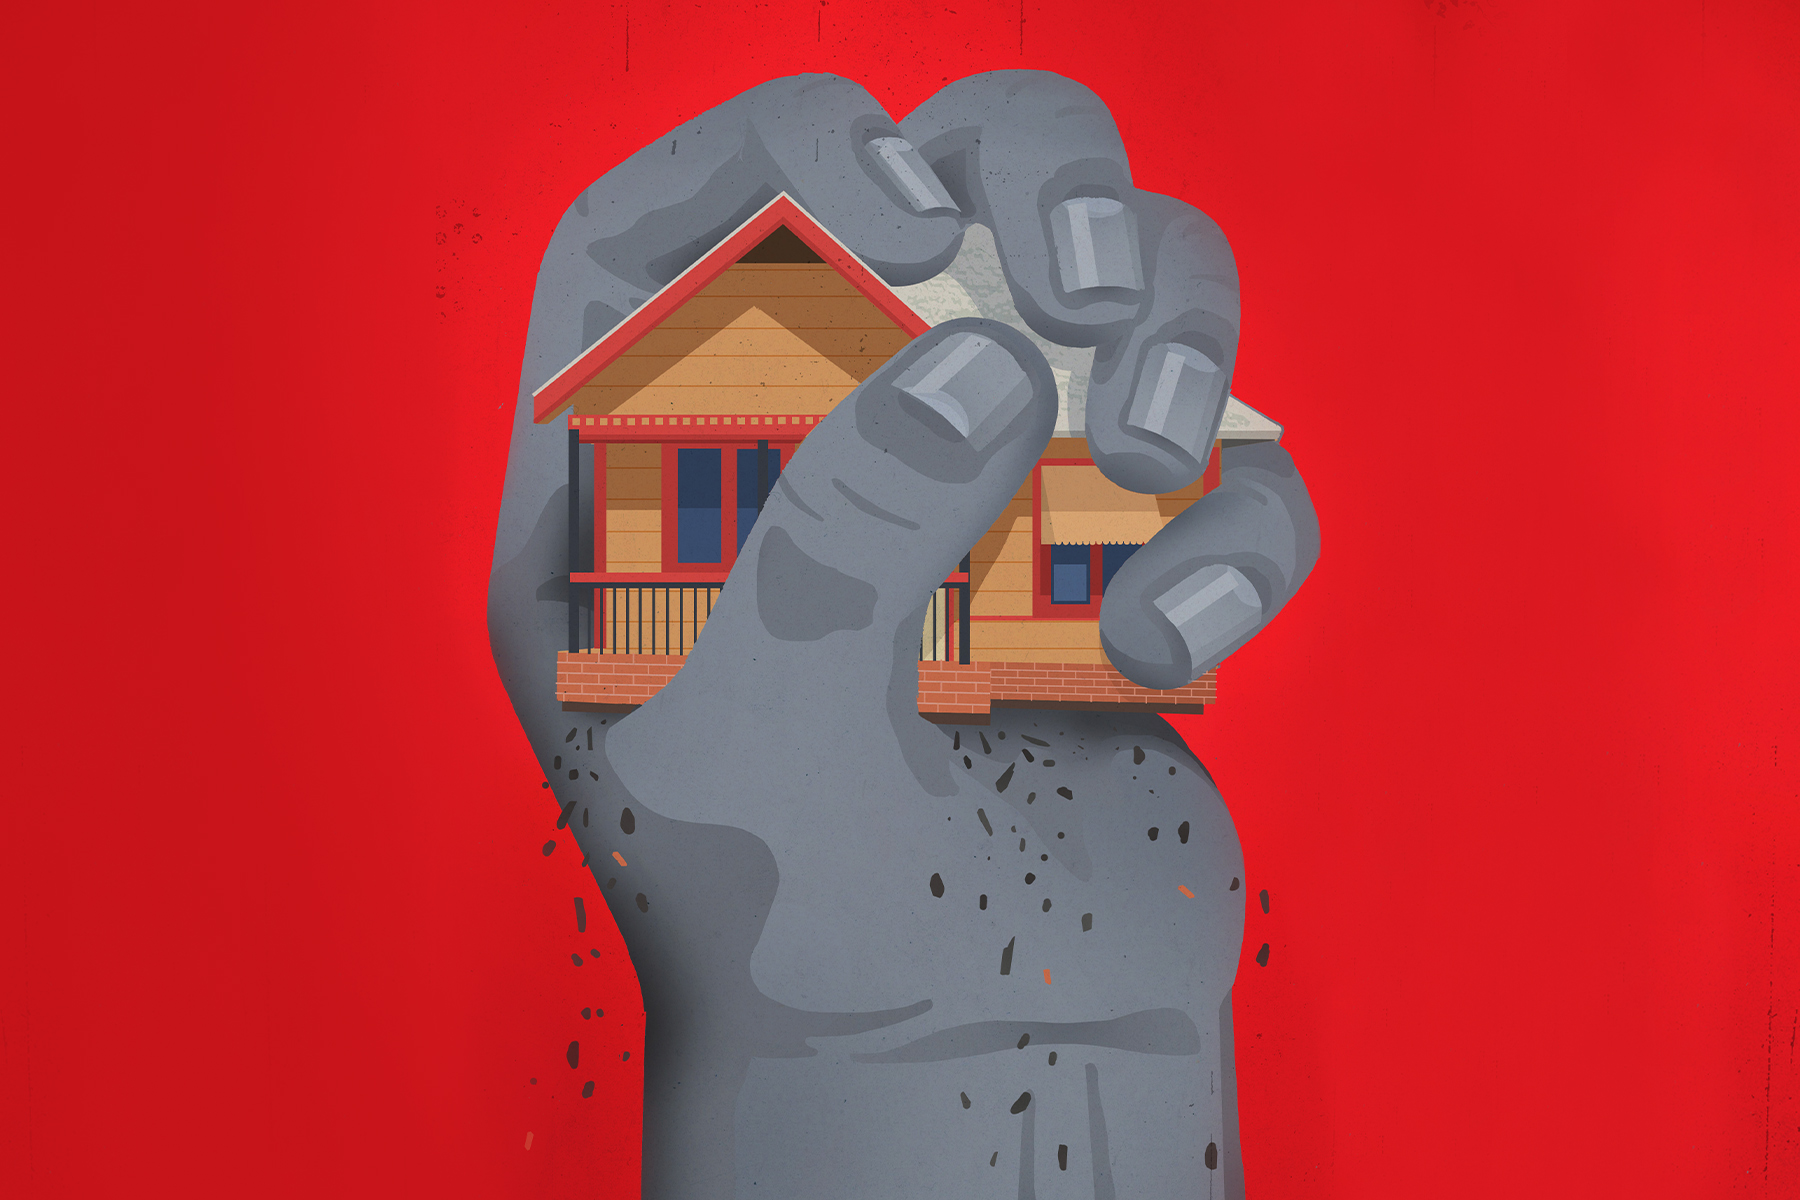 Richard Mia illustration of a hand crushing a house